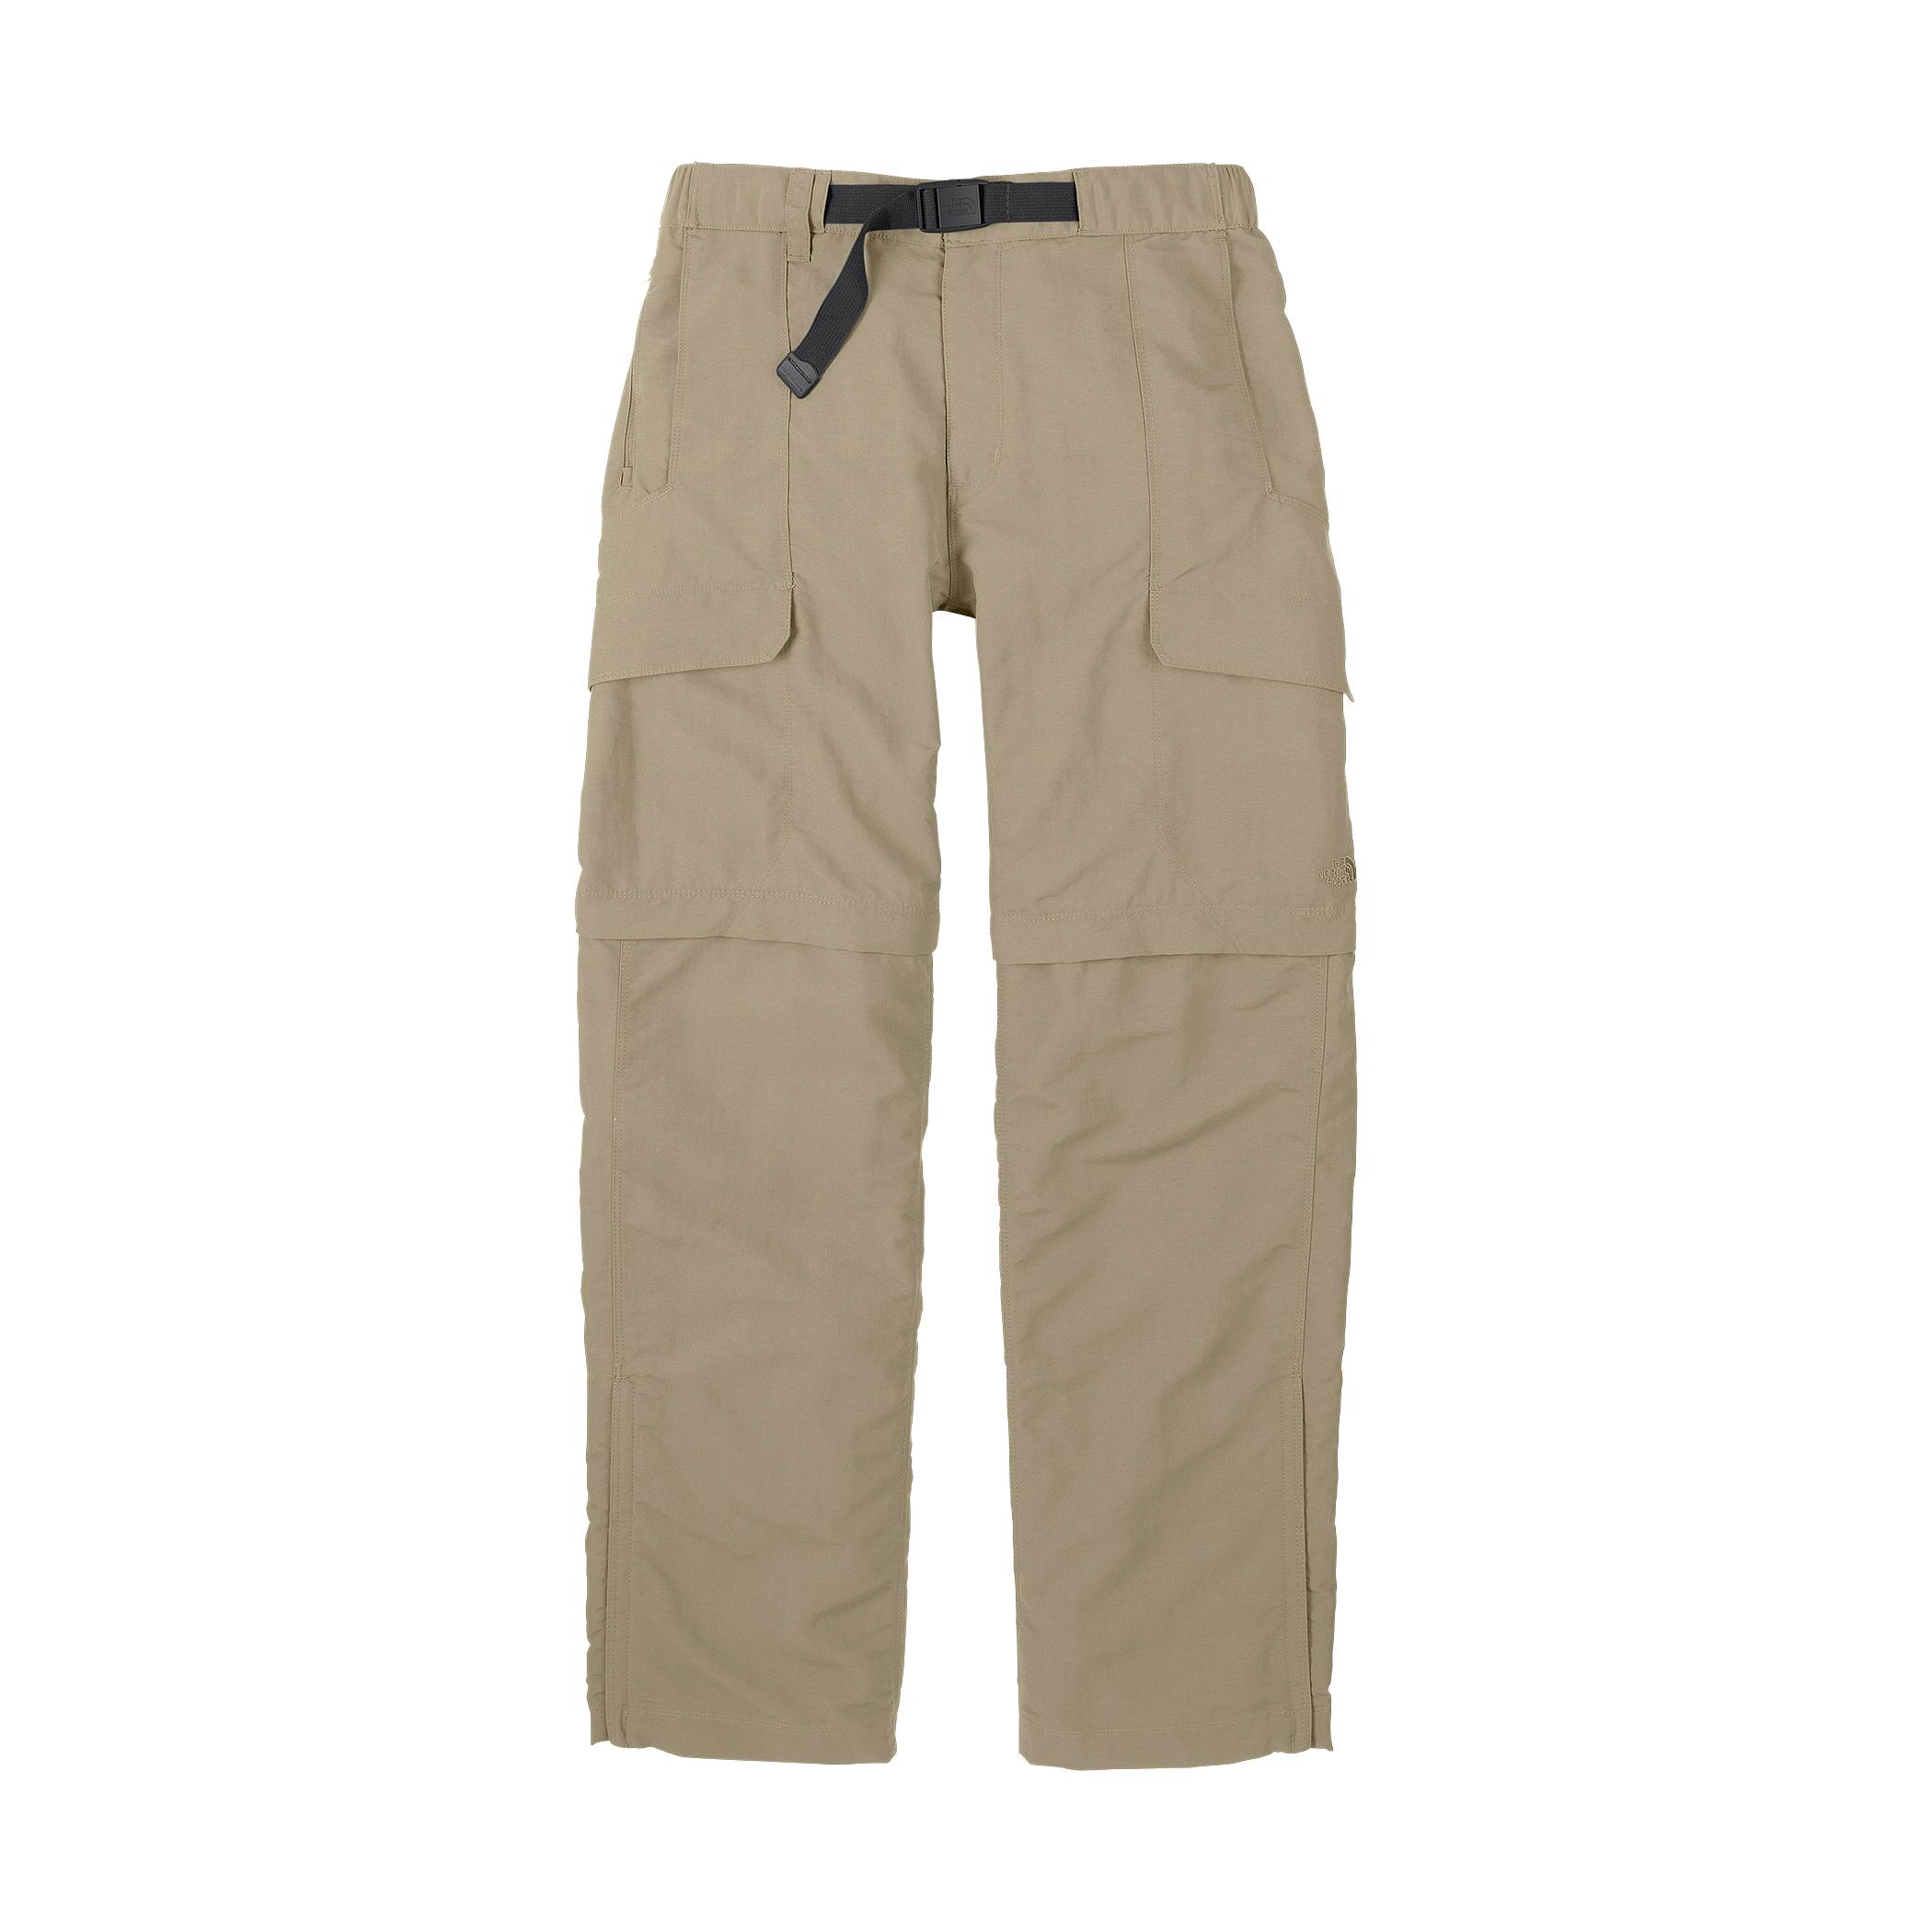 Let's talk about pants for hiking/camping. - AR15.COM